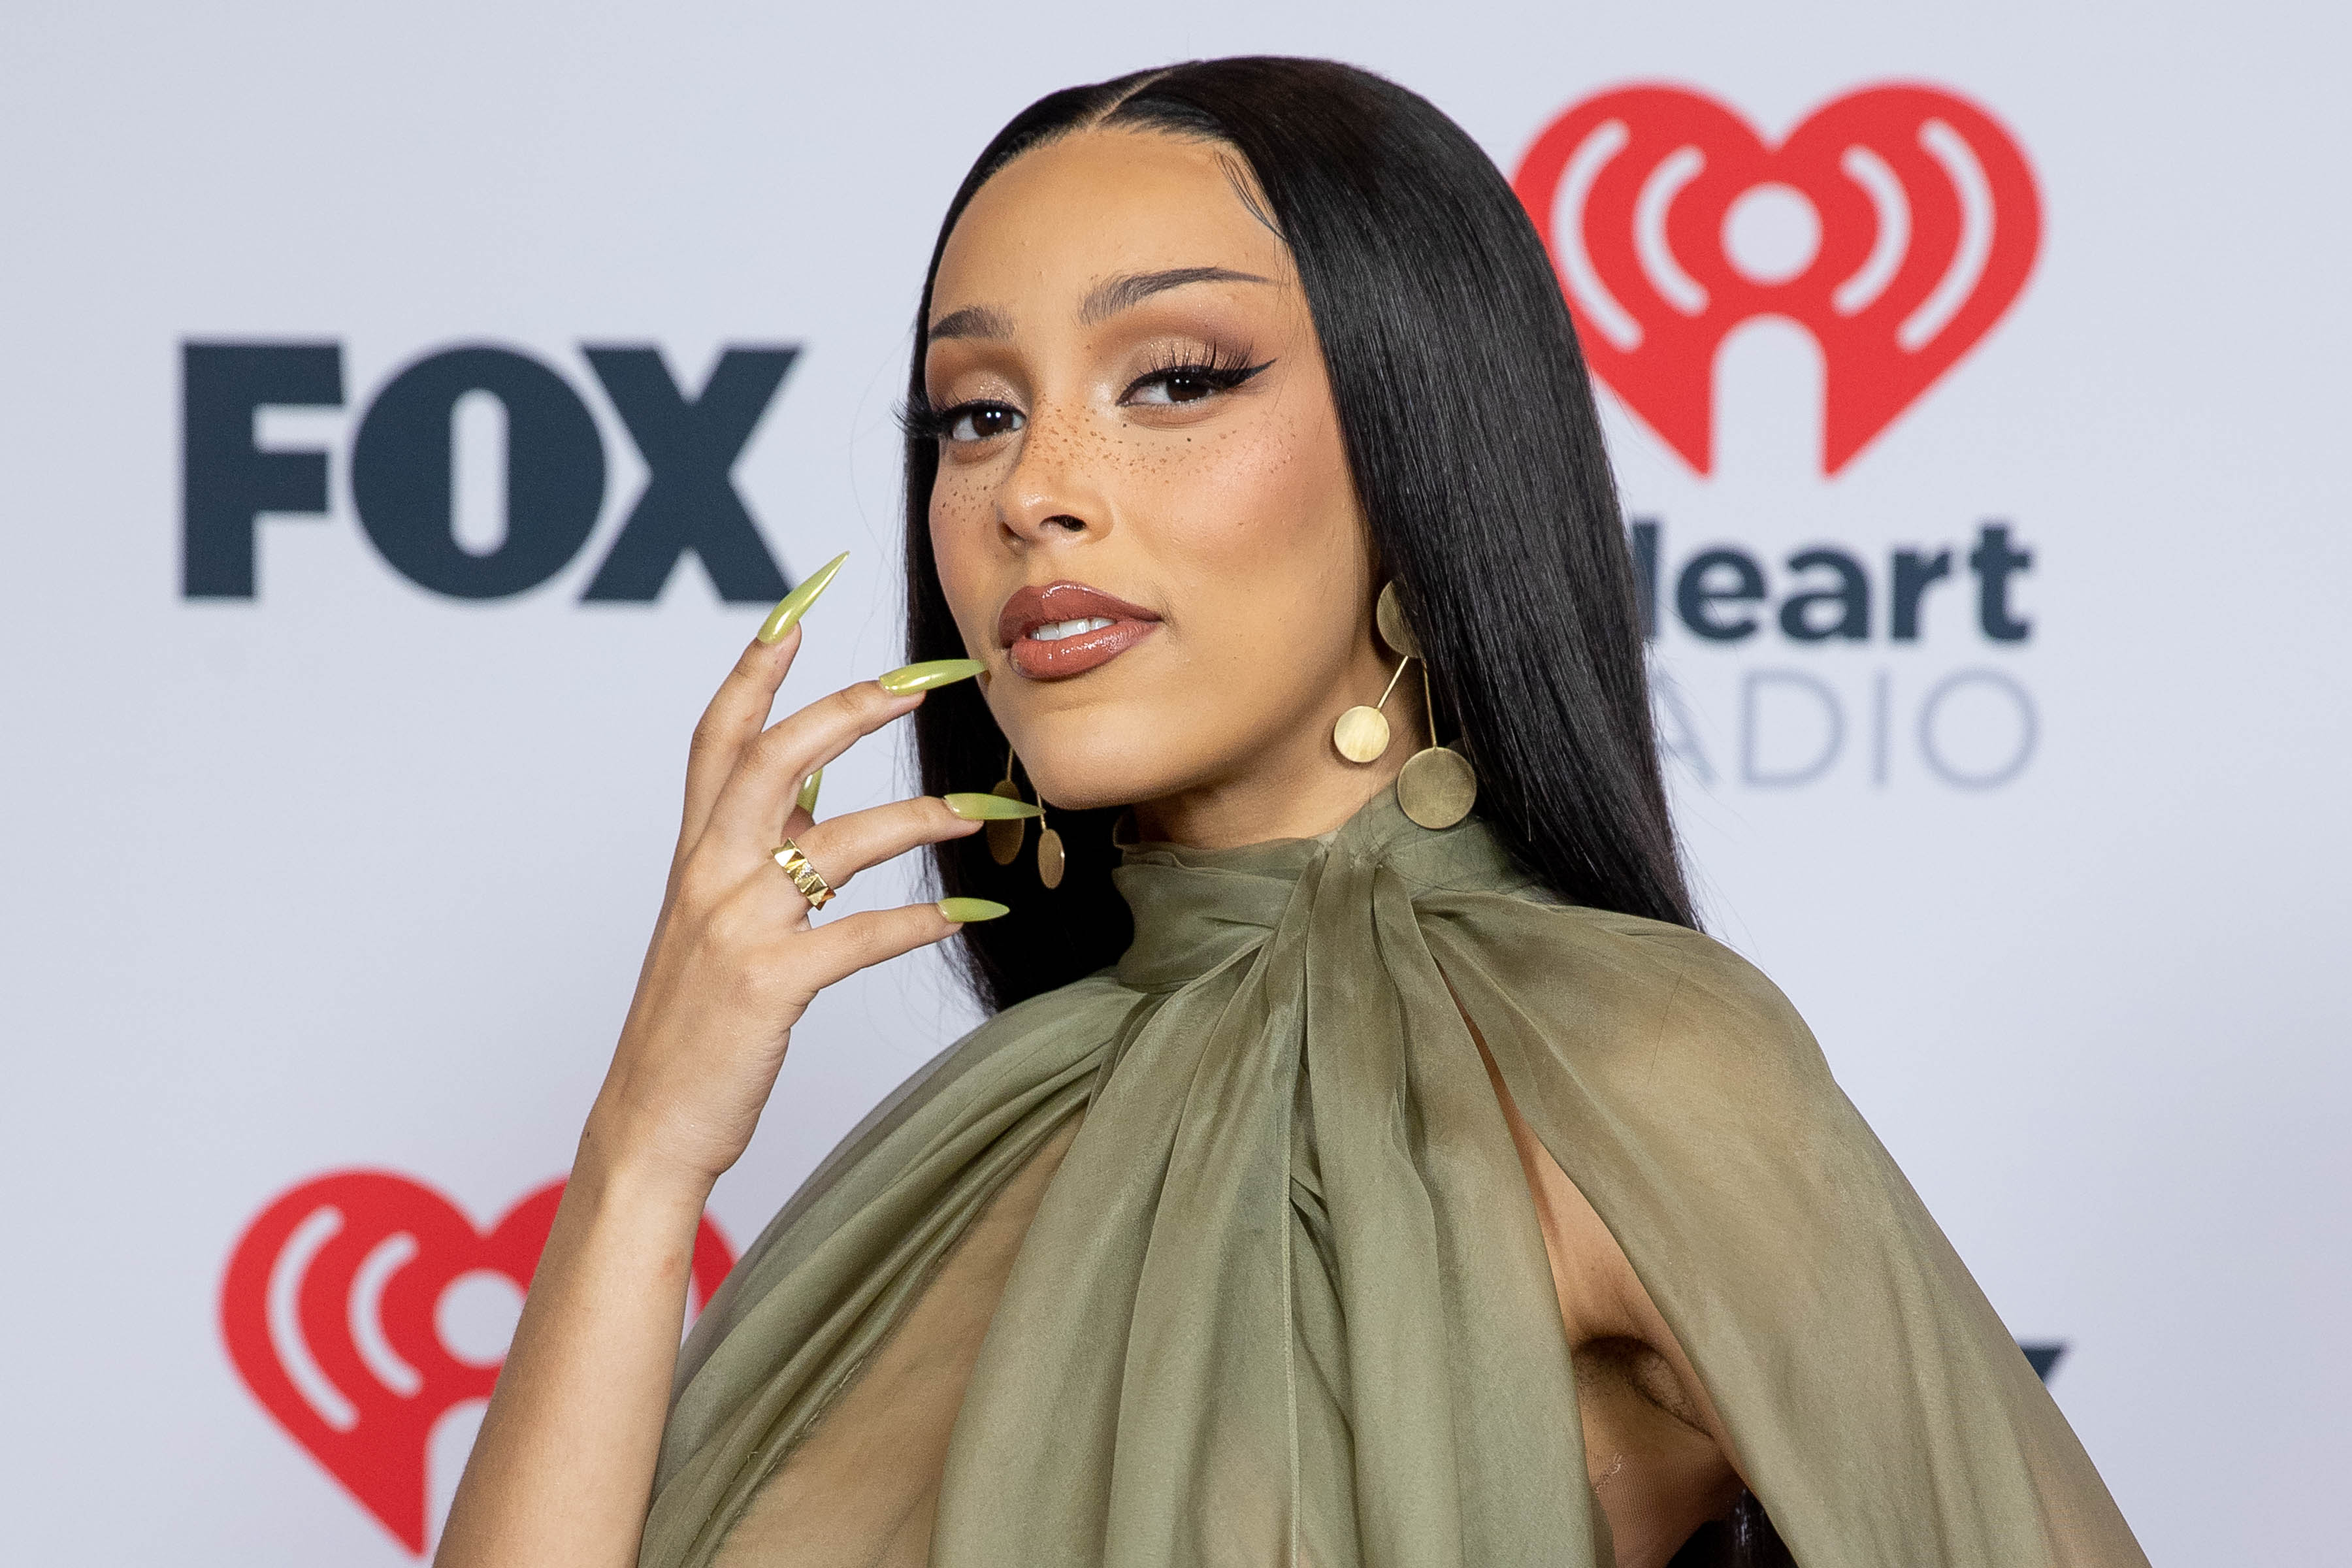 Doja Cat at the 2021 iHeartRadio Music Awards on May 27, 2021, in Los Angeles, California. | Source: Getty Images